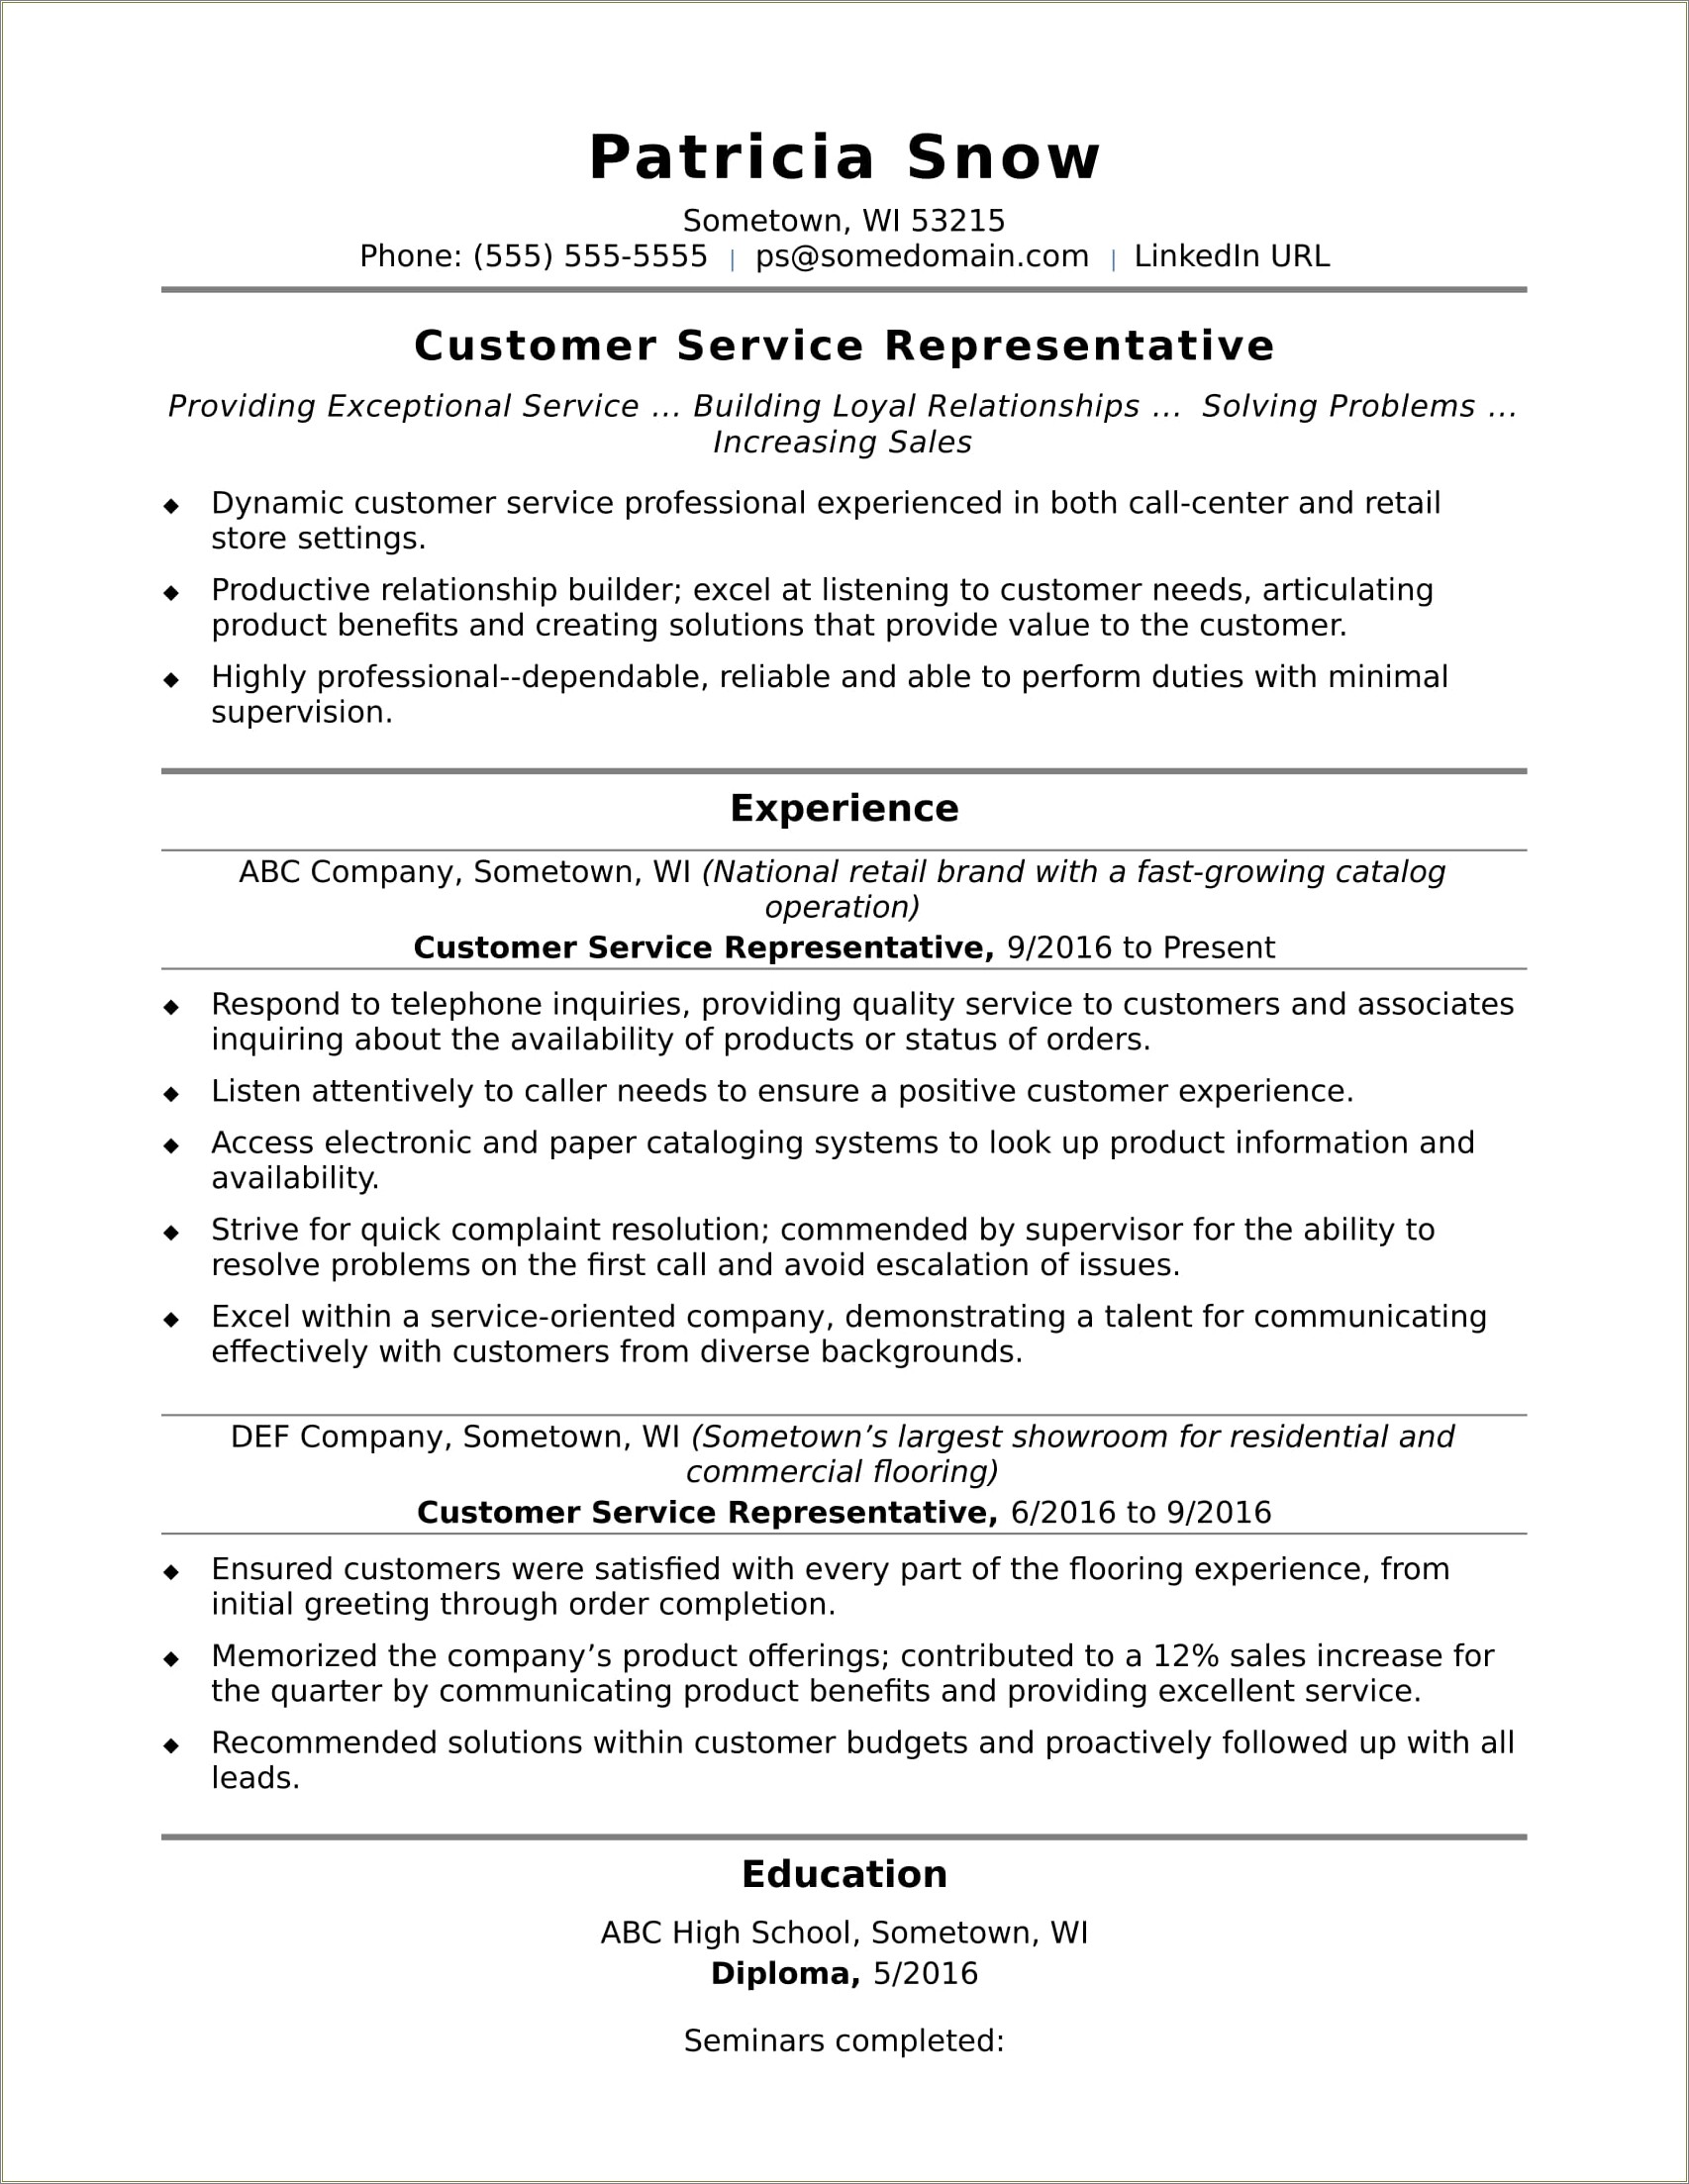 For Resume Skills About Customer Service